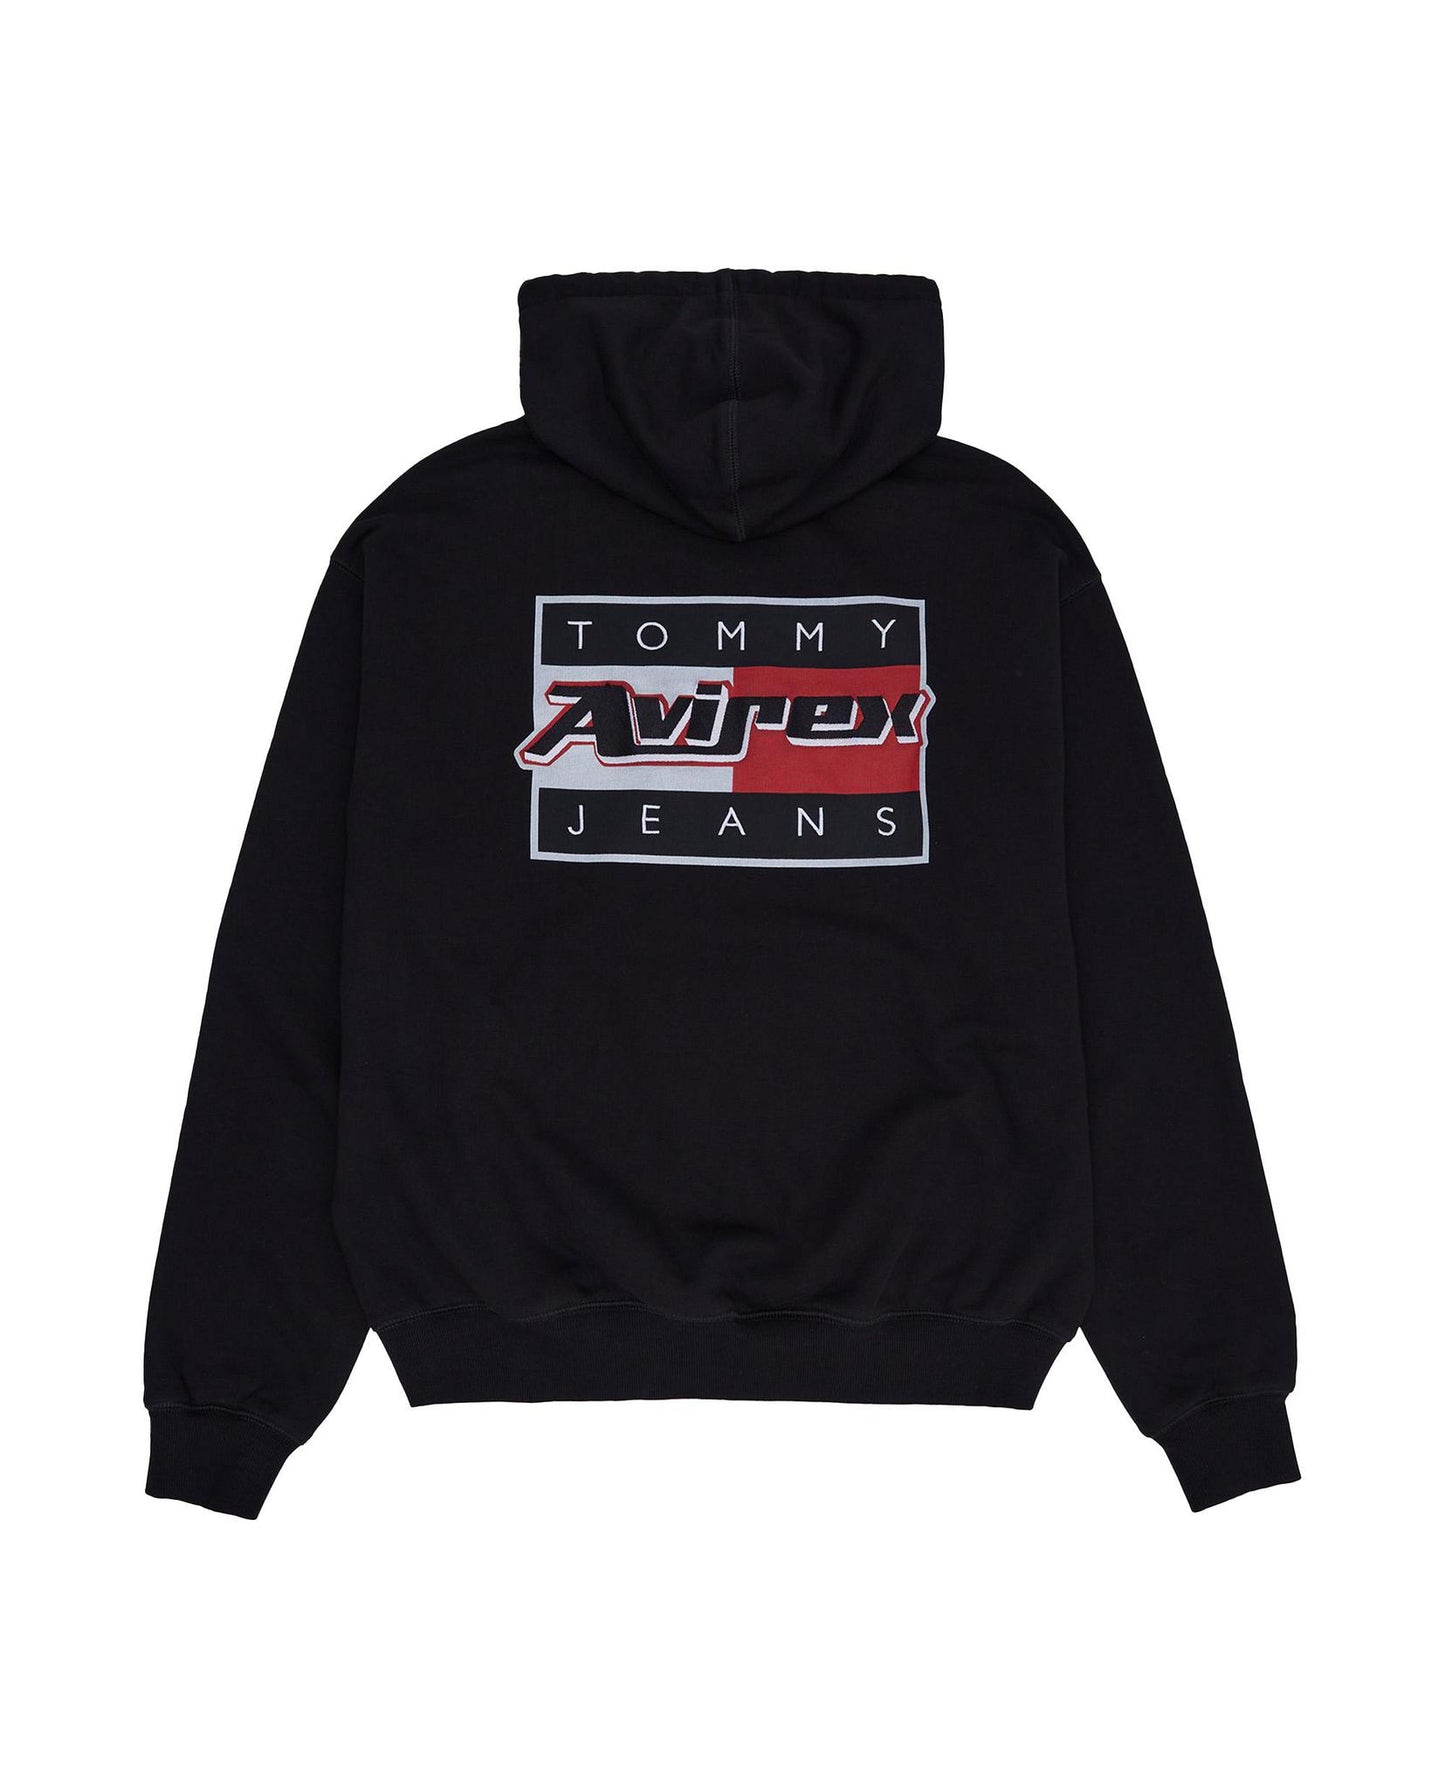 
                    
                      Tommy Jeans x Avirex Hoodie
                    
                  